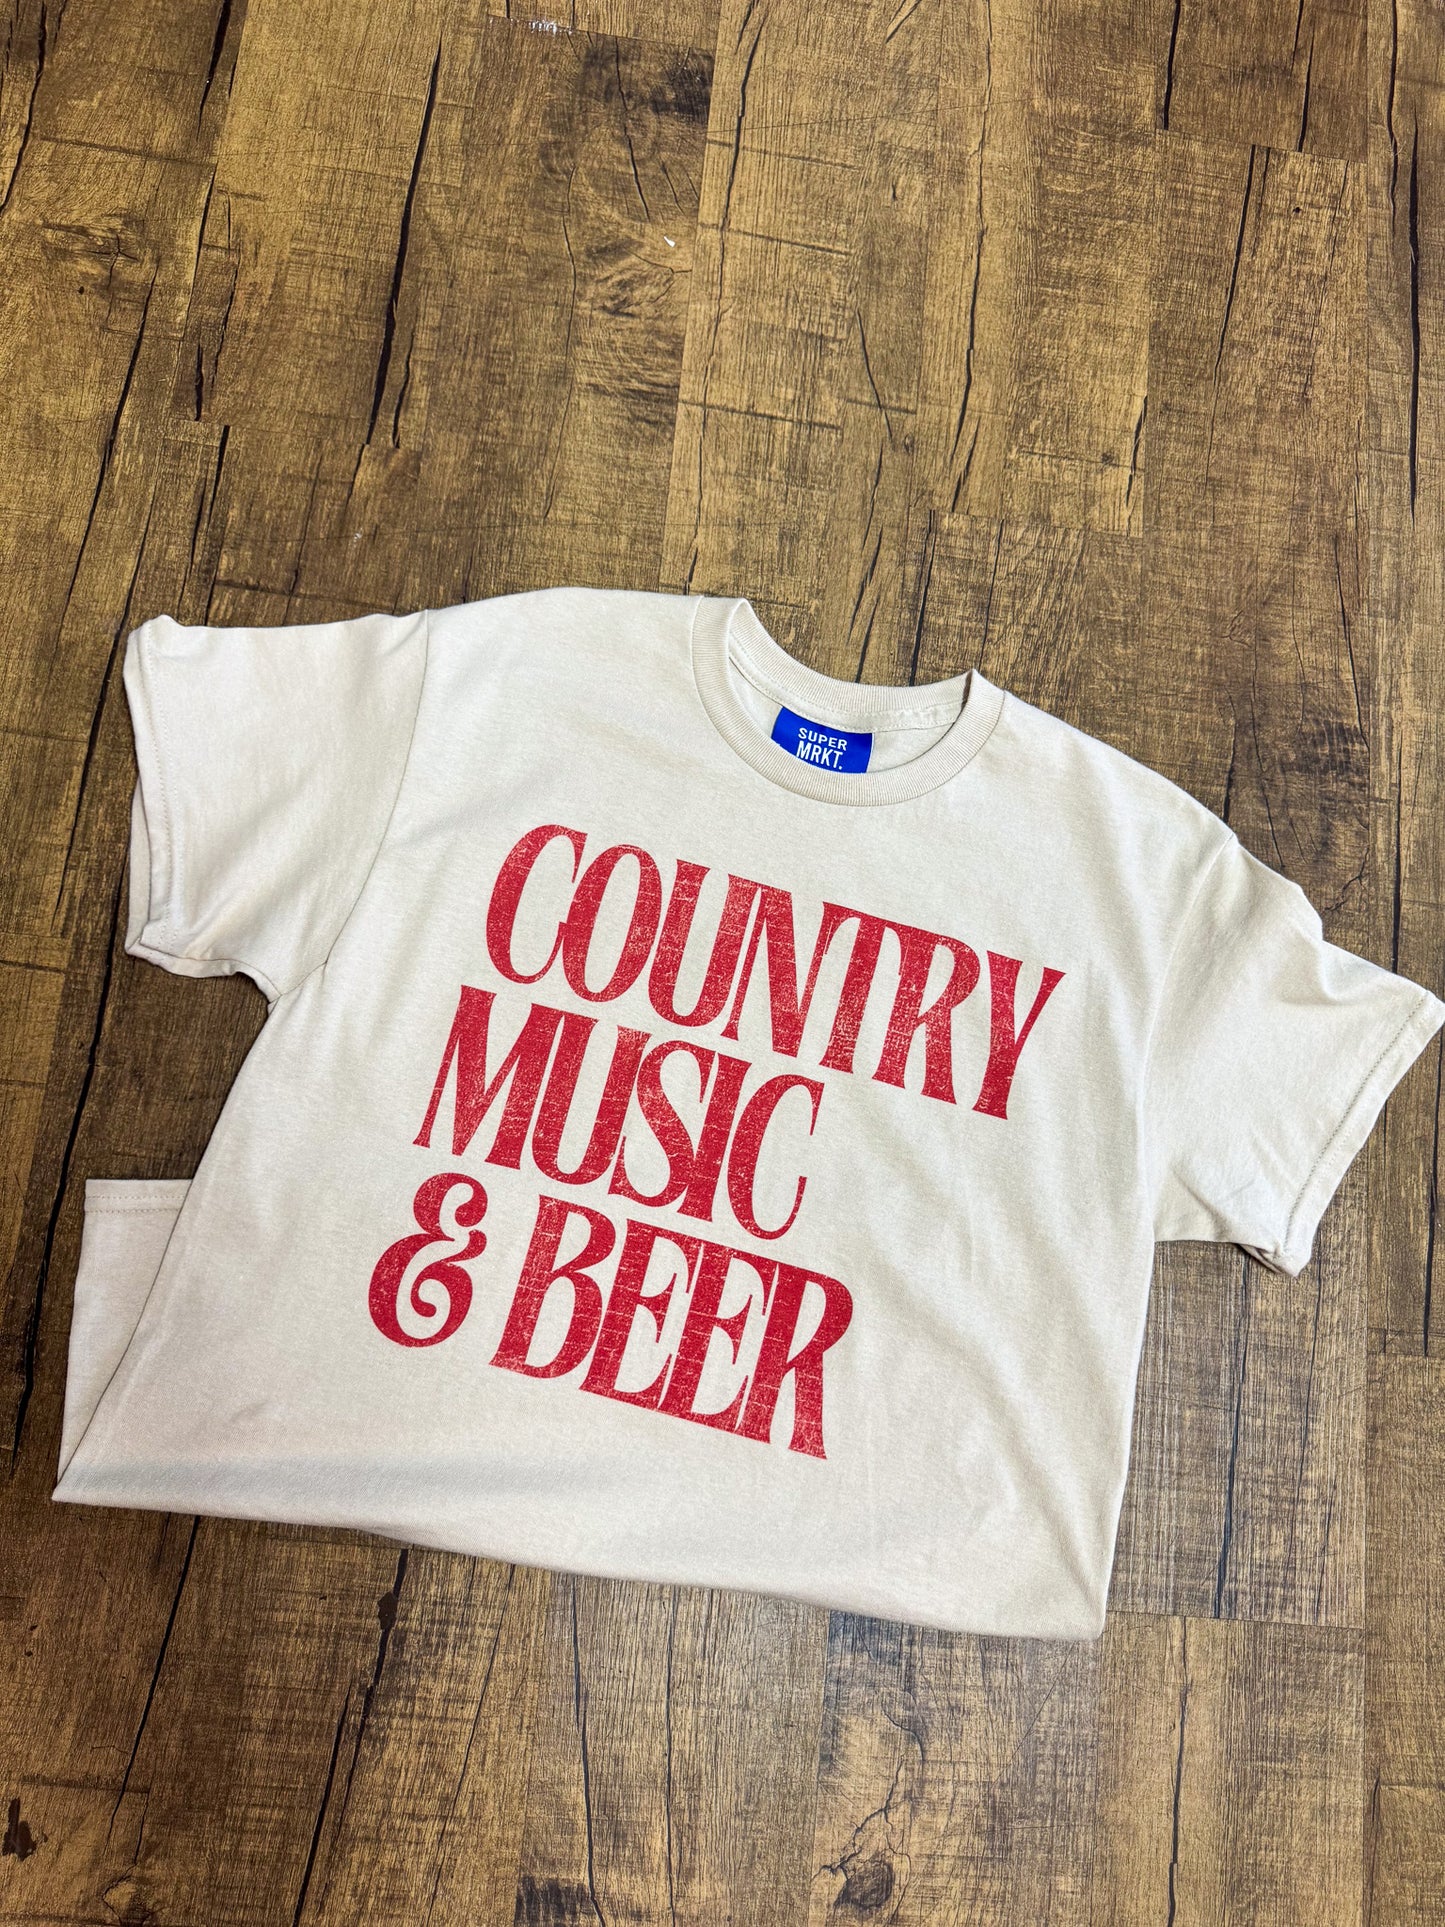 Country Music & Beer Graphic